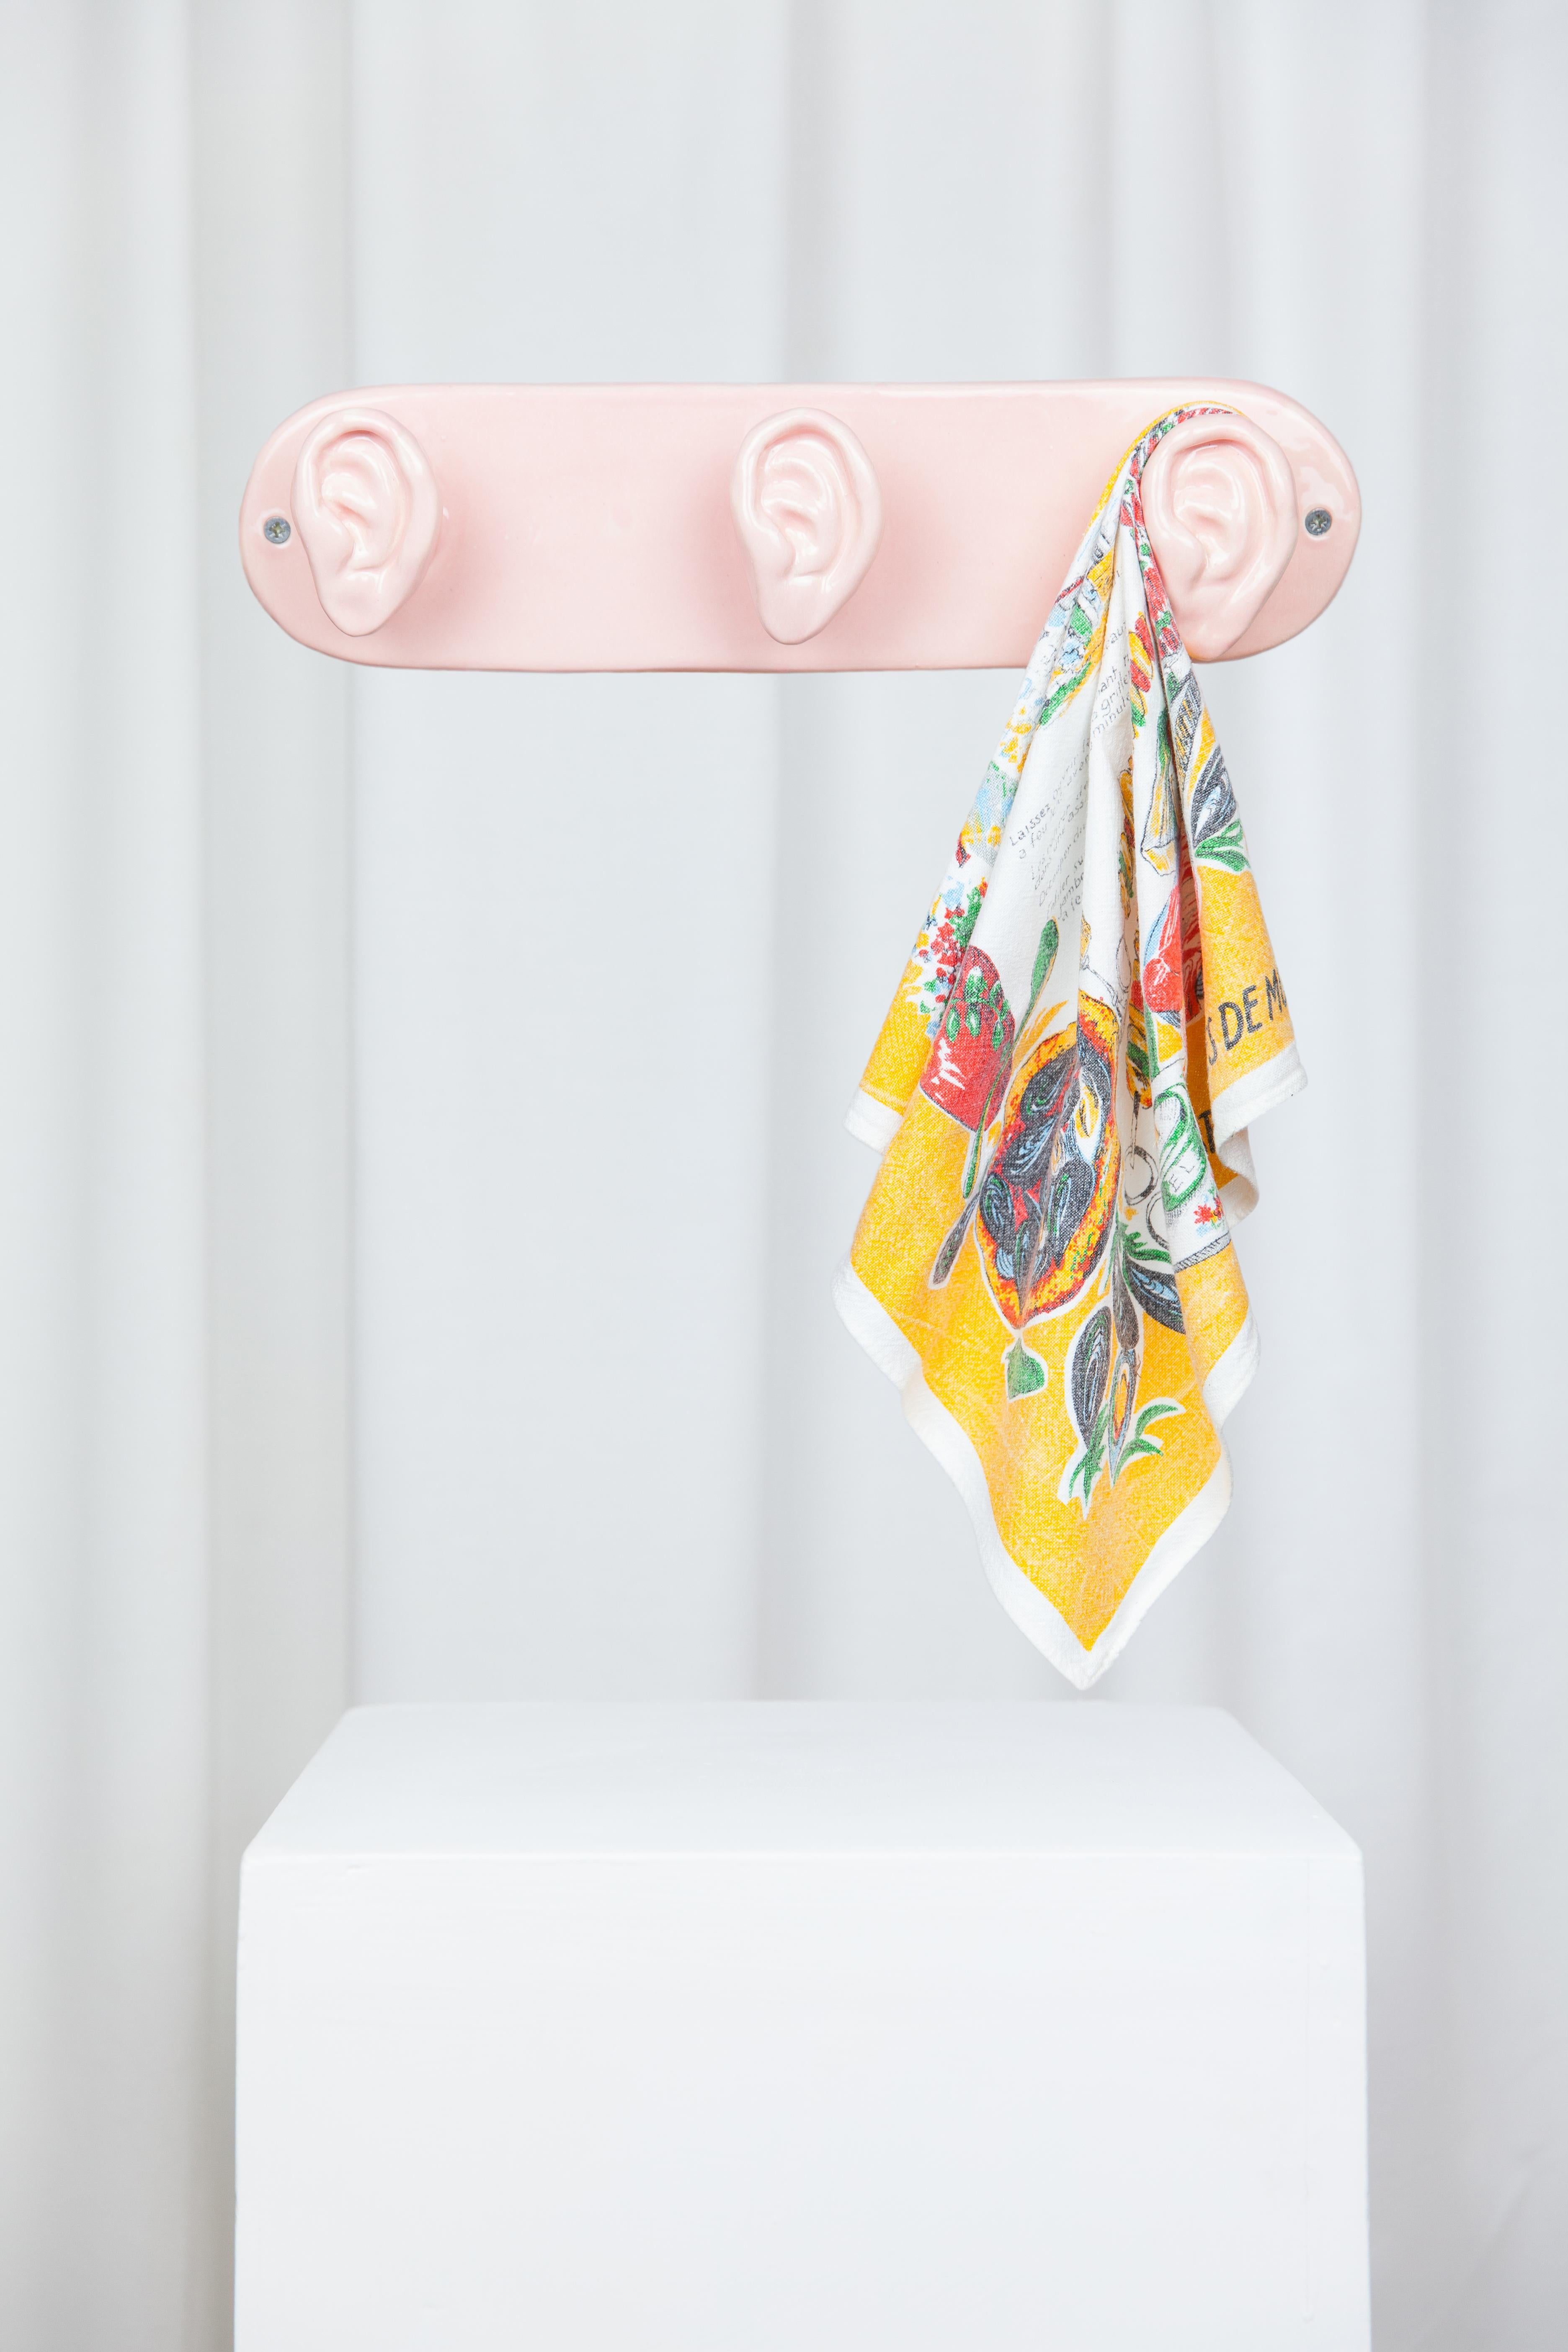 Pair of hanging 3 ears pink towel hooks by Lola Mayeras
Dimensions: D37 x H6 cm
Materials: Earthenware.

Towel hooks in white earthenware, glazed in beige.
This piece is designed and handcrafted in the south of France.

Lola Mayeras —